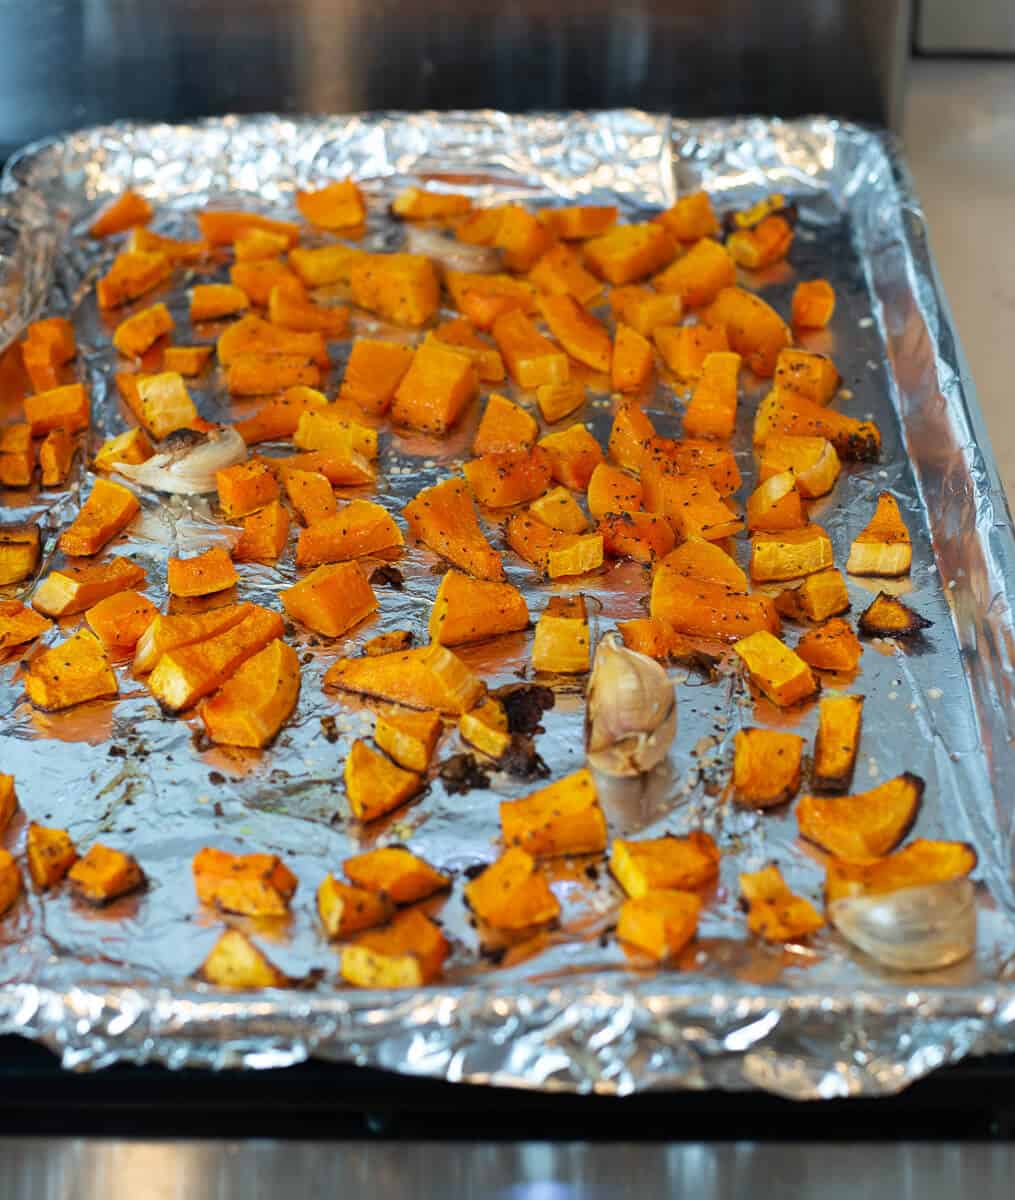 Roasted cubes of butternut squash with whole cloves of garlic on a sheet pan.